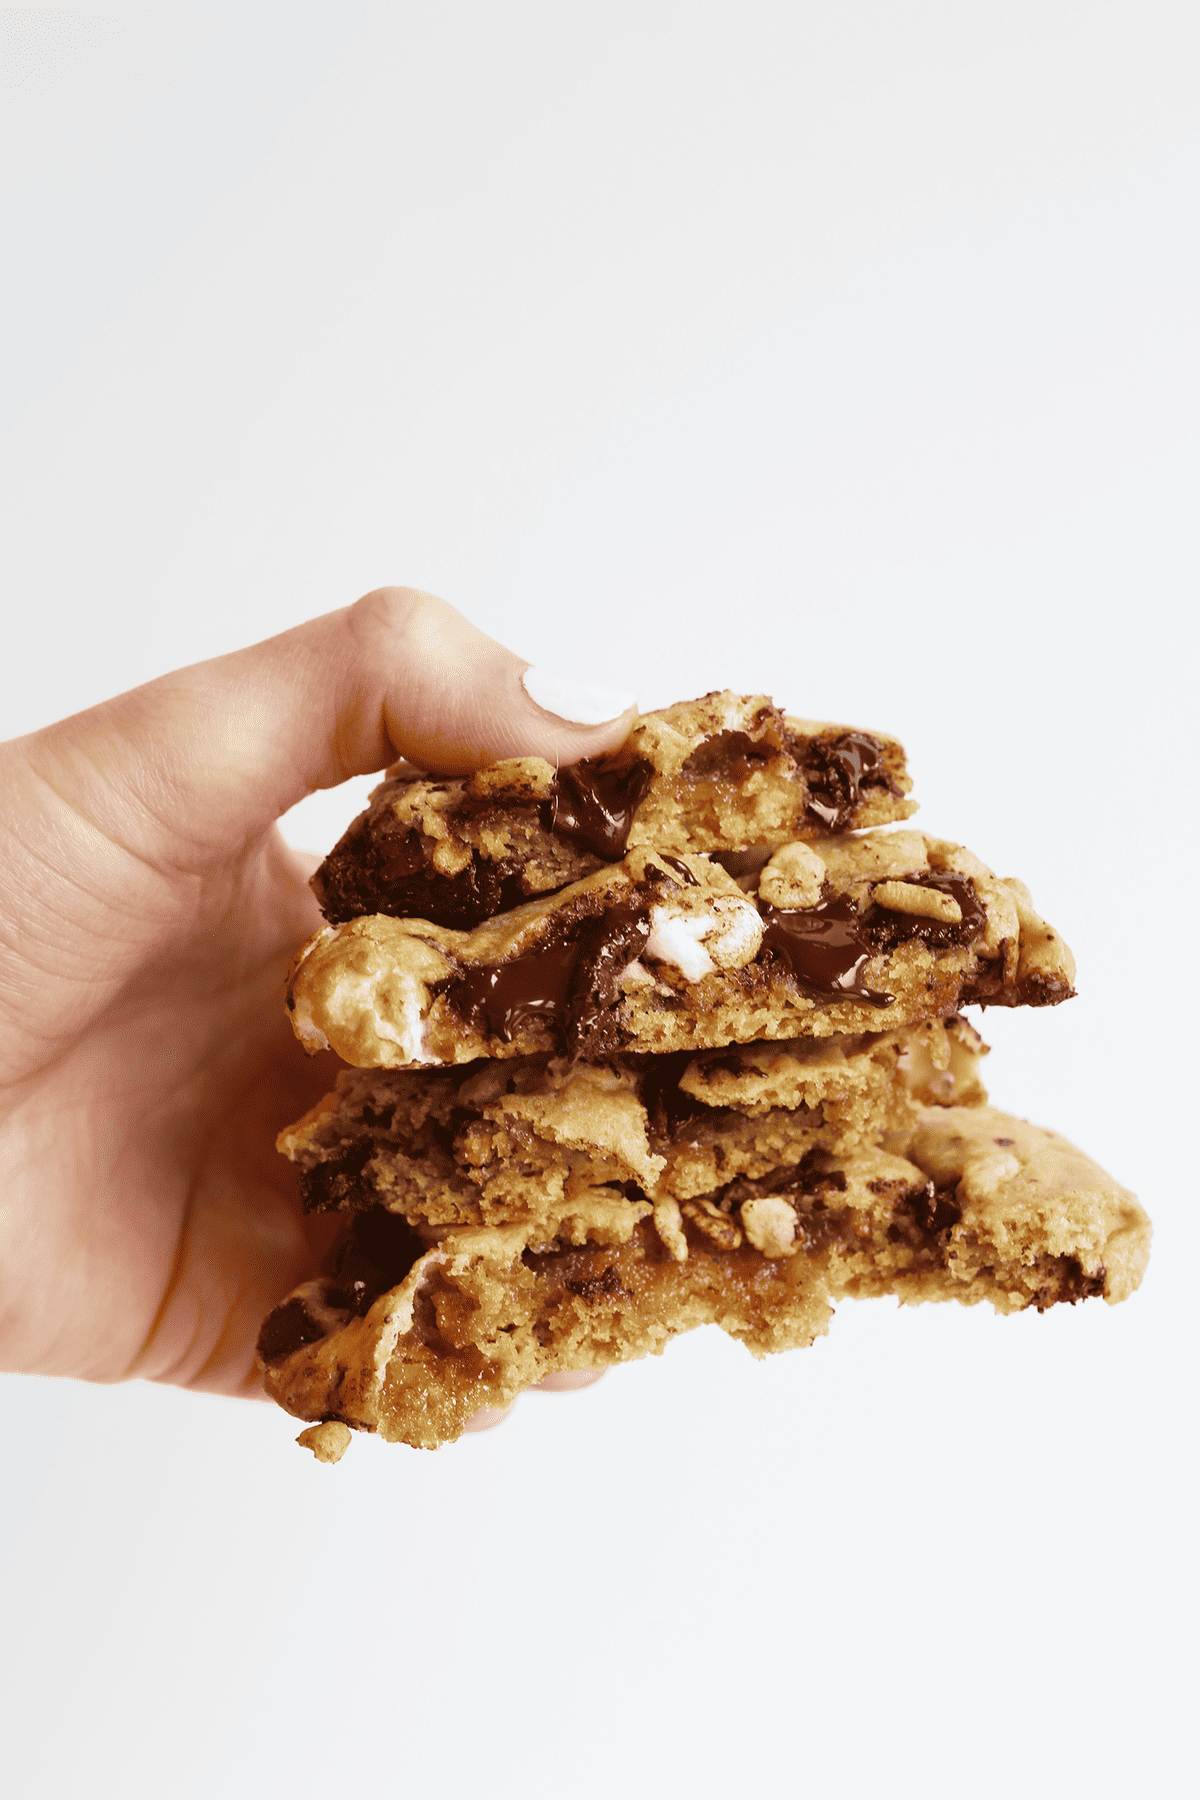 Chocolate Marshmallow Crispy Treat Cookies, a combination of a s’more and a rice crispy bar plus they’re vegan and only require 1 bowl!